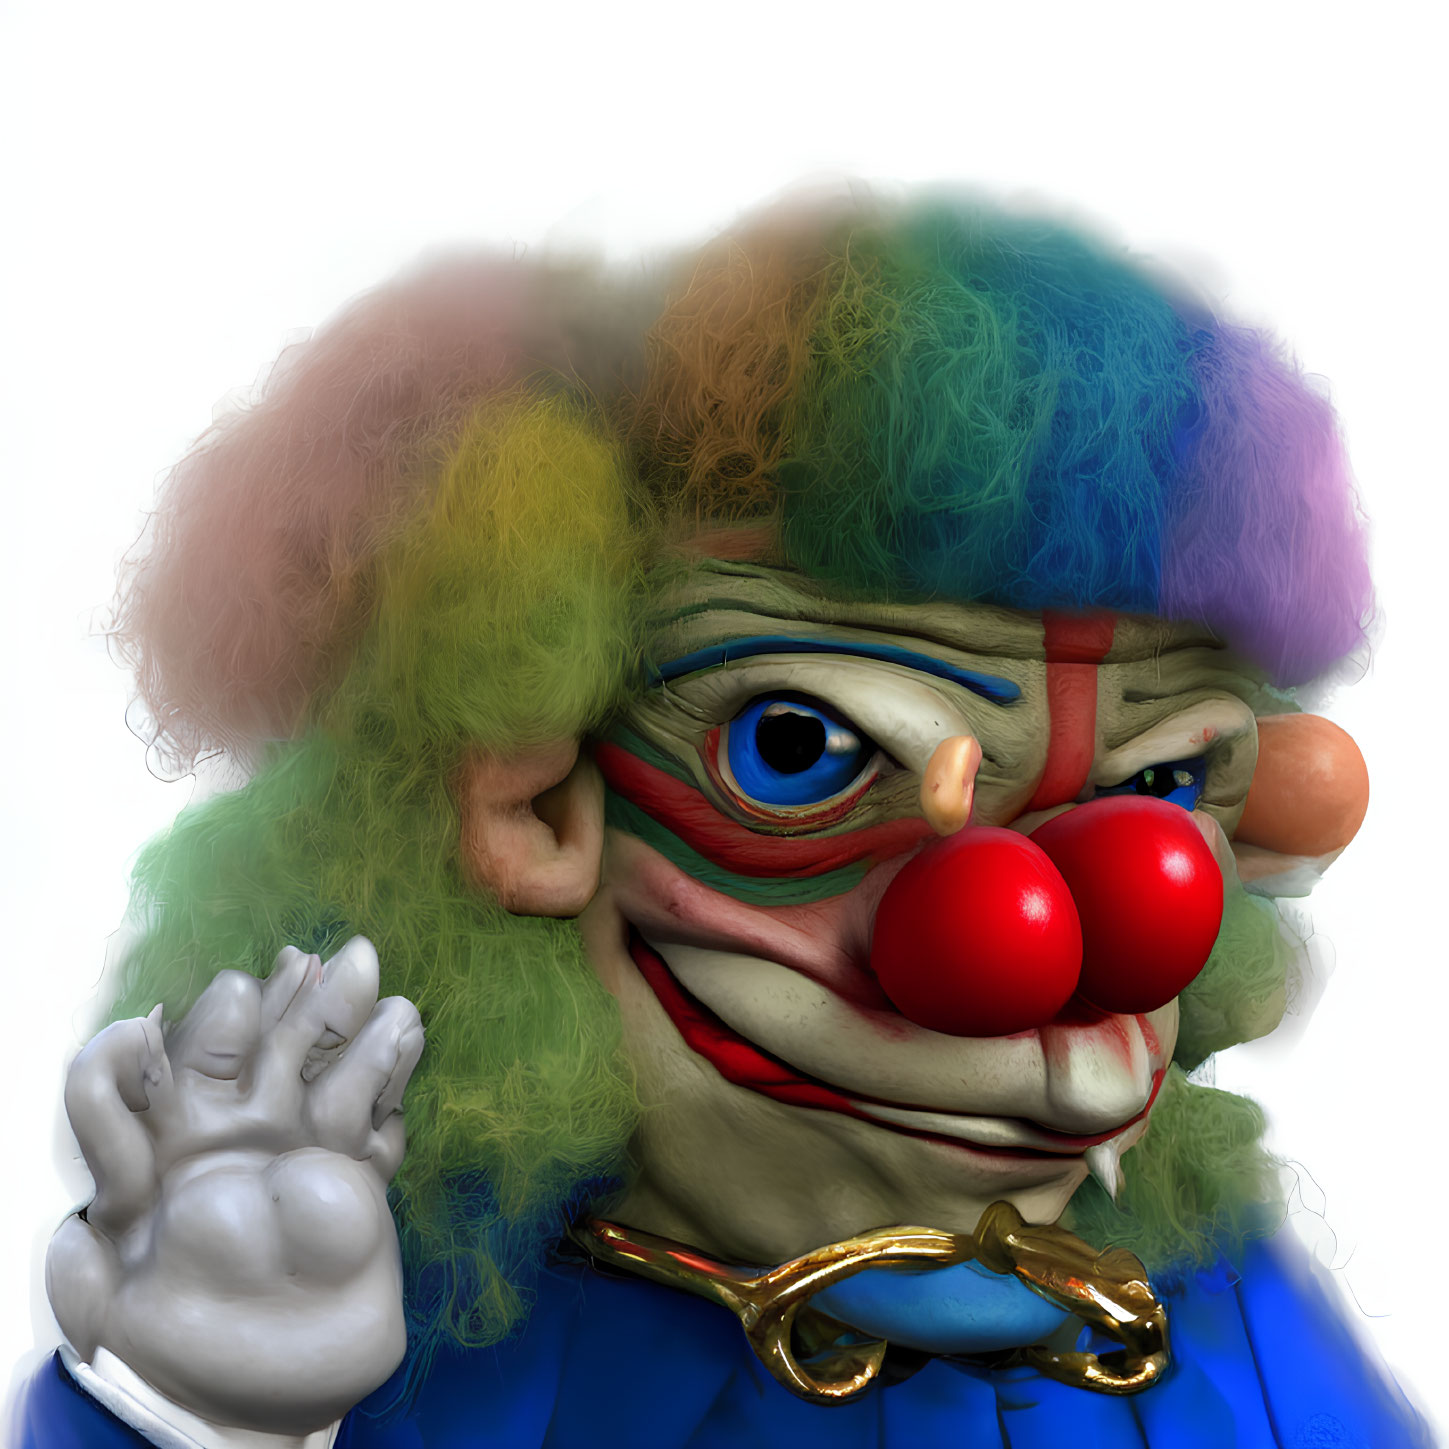 Colorful Clown Illustration: Blue Outfit, Rainbow Hair, Big Red Nose